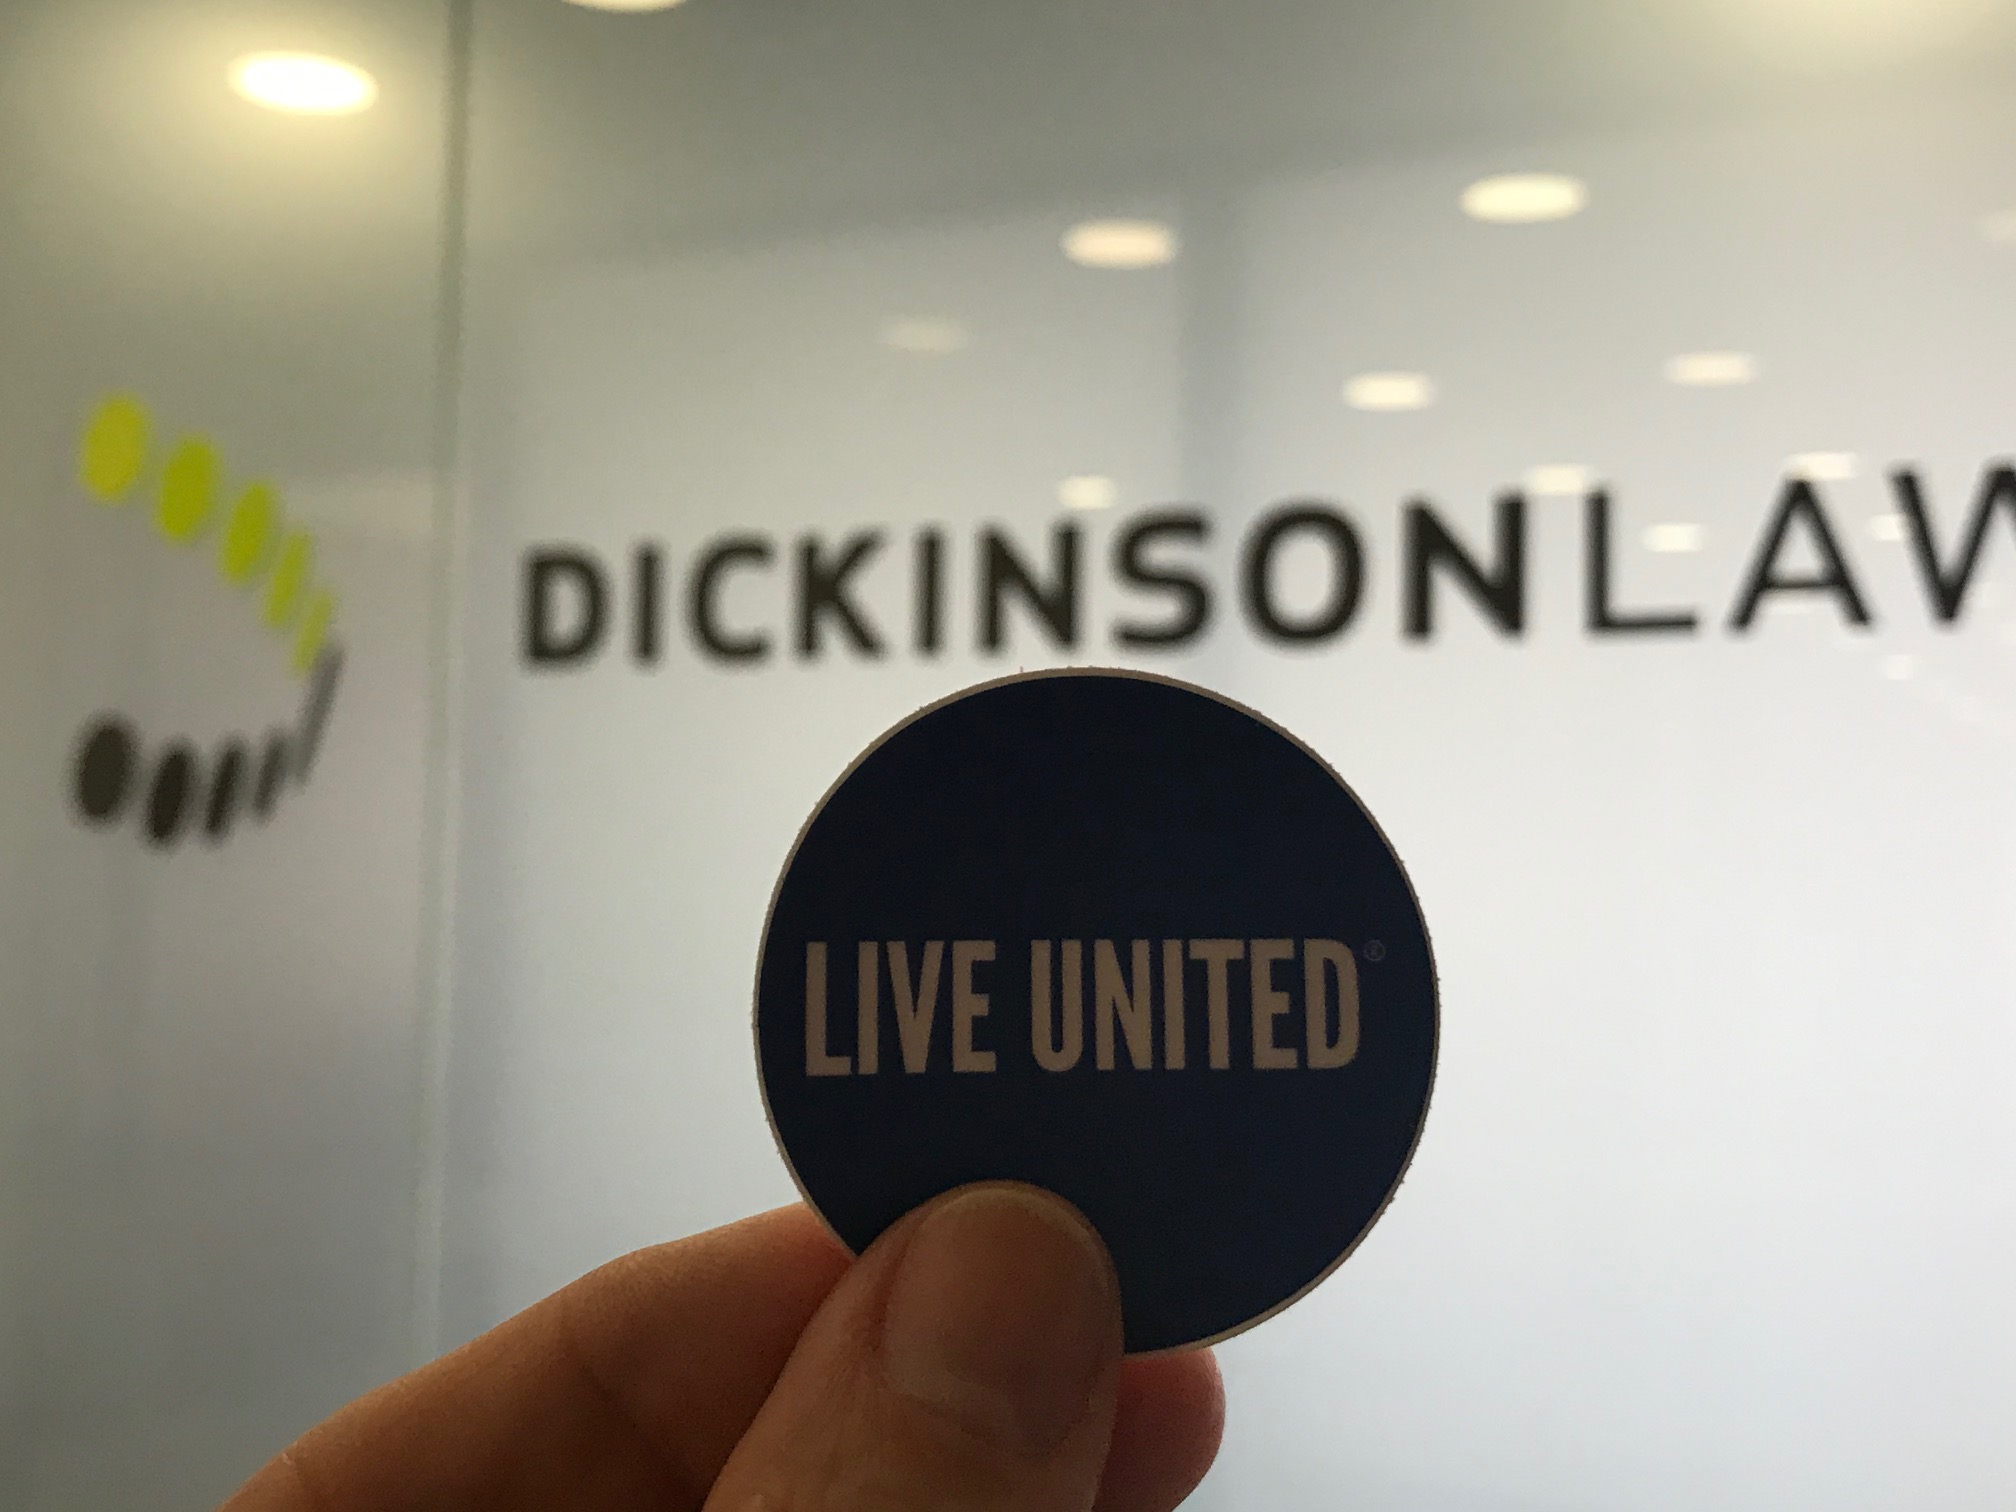 It's United Way Campaign Week at Dickinson Law